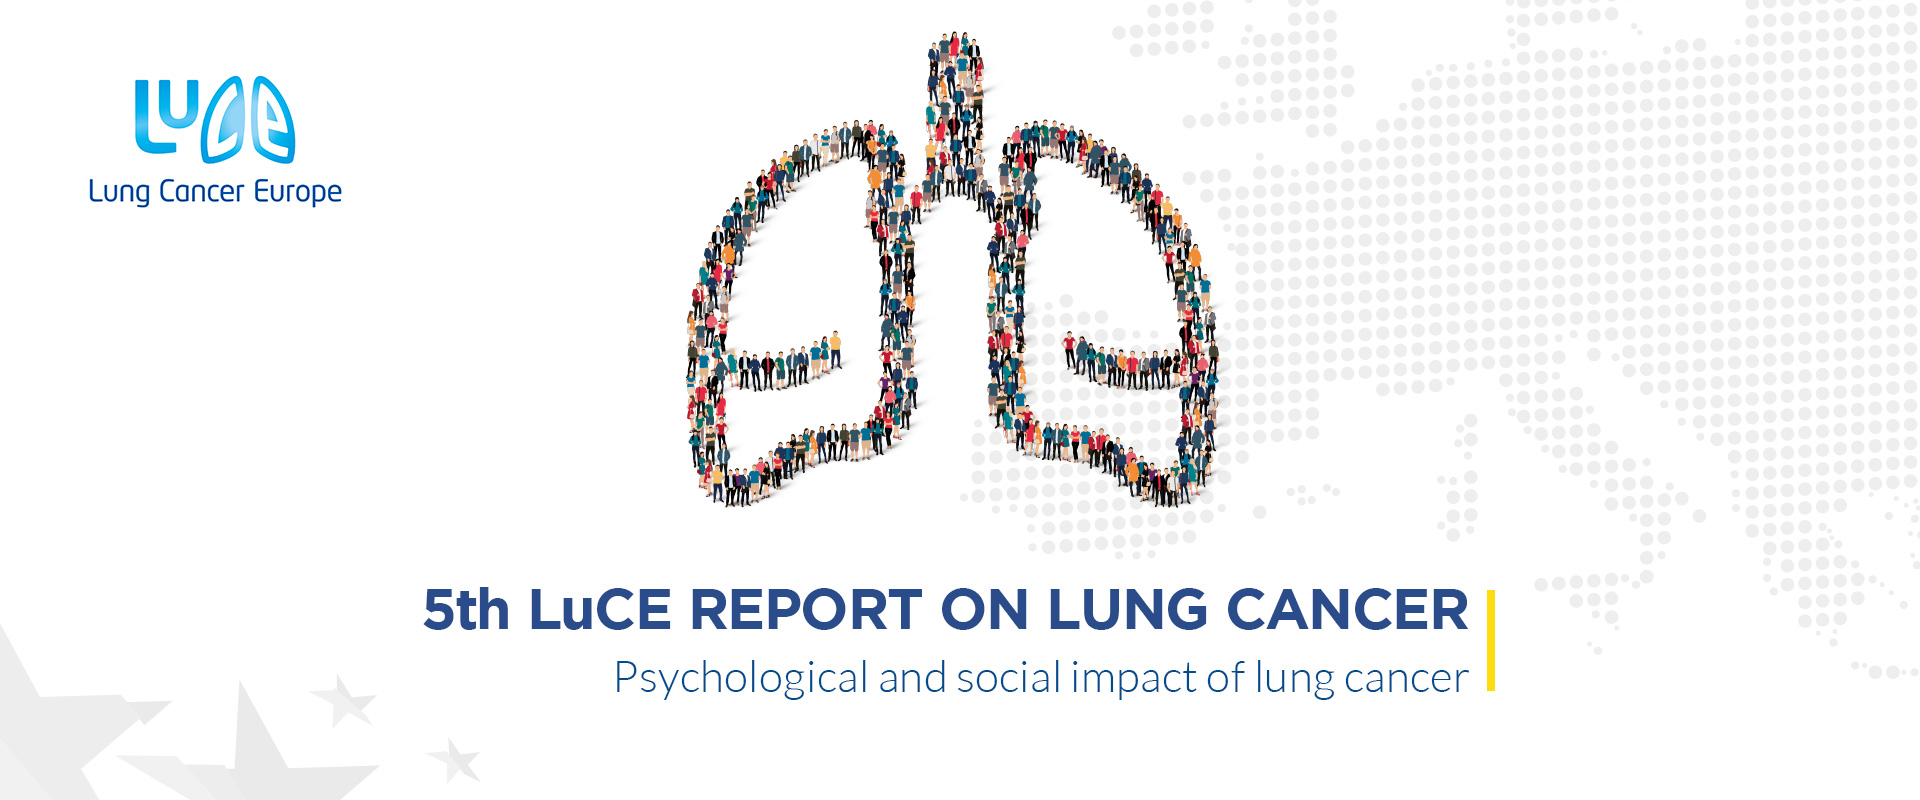 5th Edition Of The Luce Report: Psychological And Social Impact Of Lung Cancer